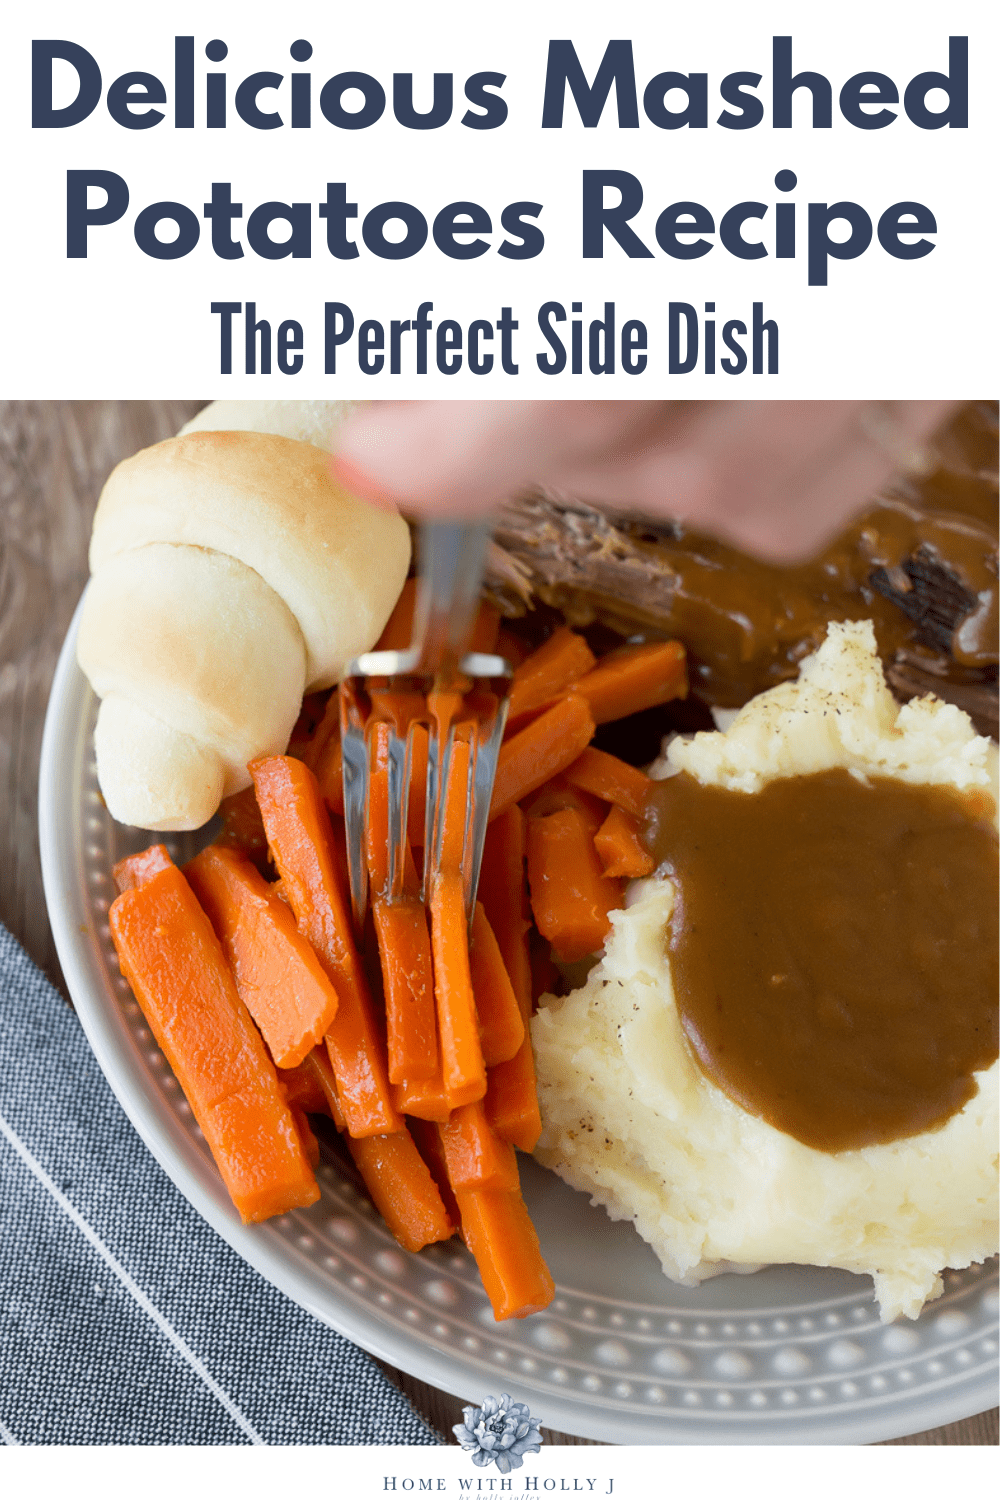 With just a few simple steps, you can make this delicious mashed potatoes recipe for the perfect side dish for any meal. Learn more here.